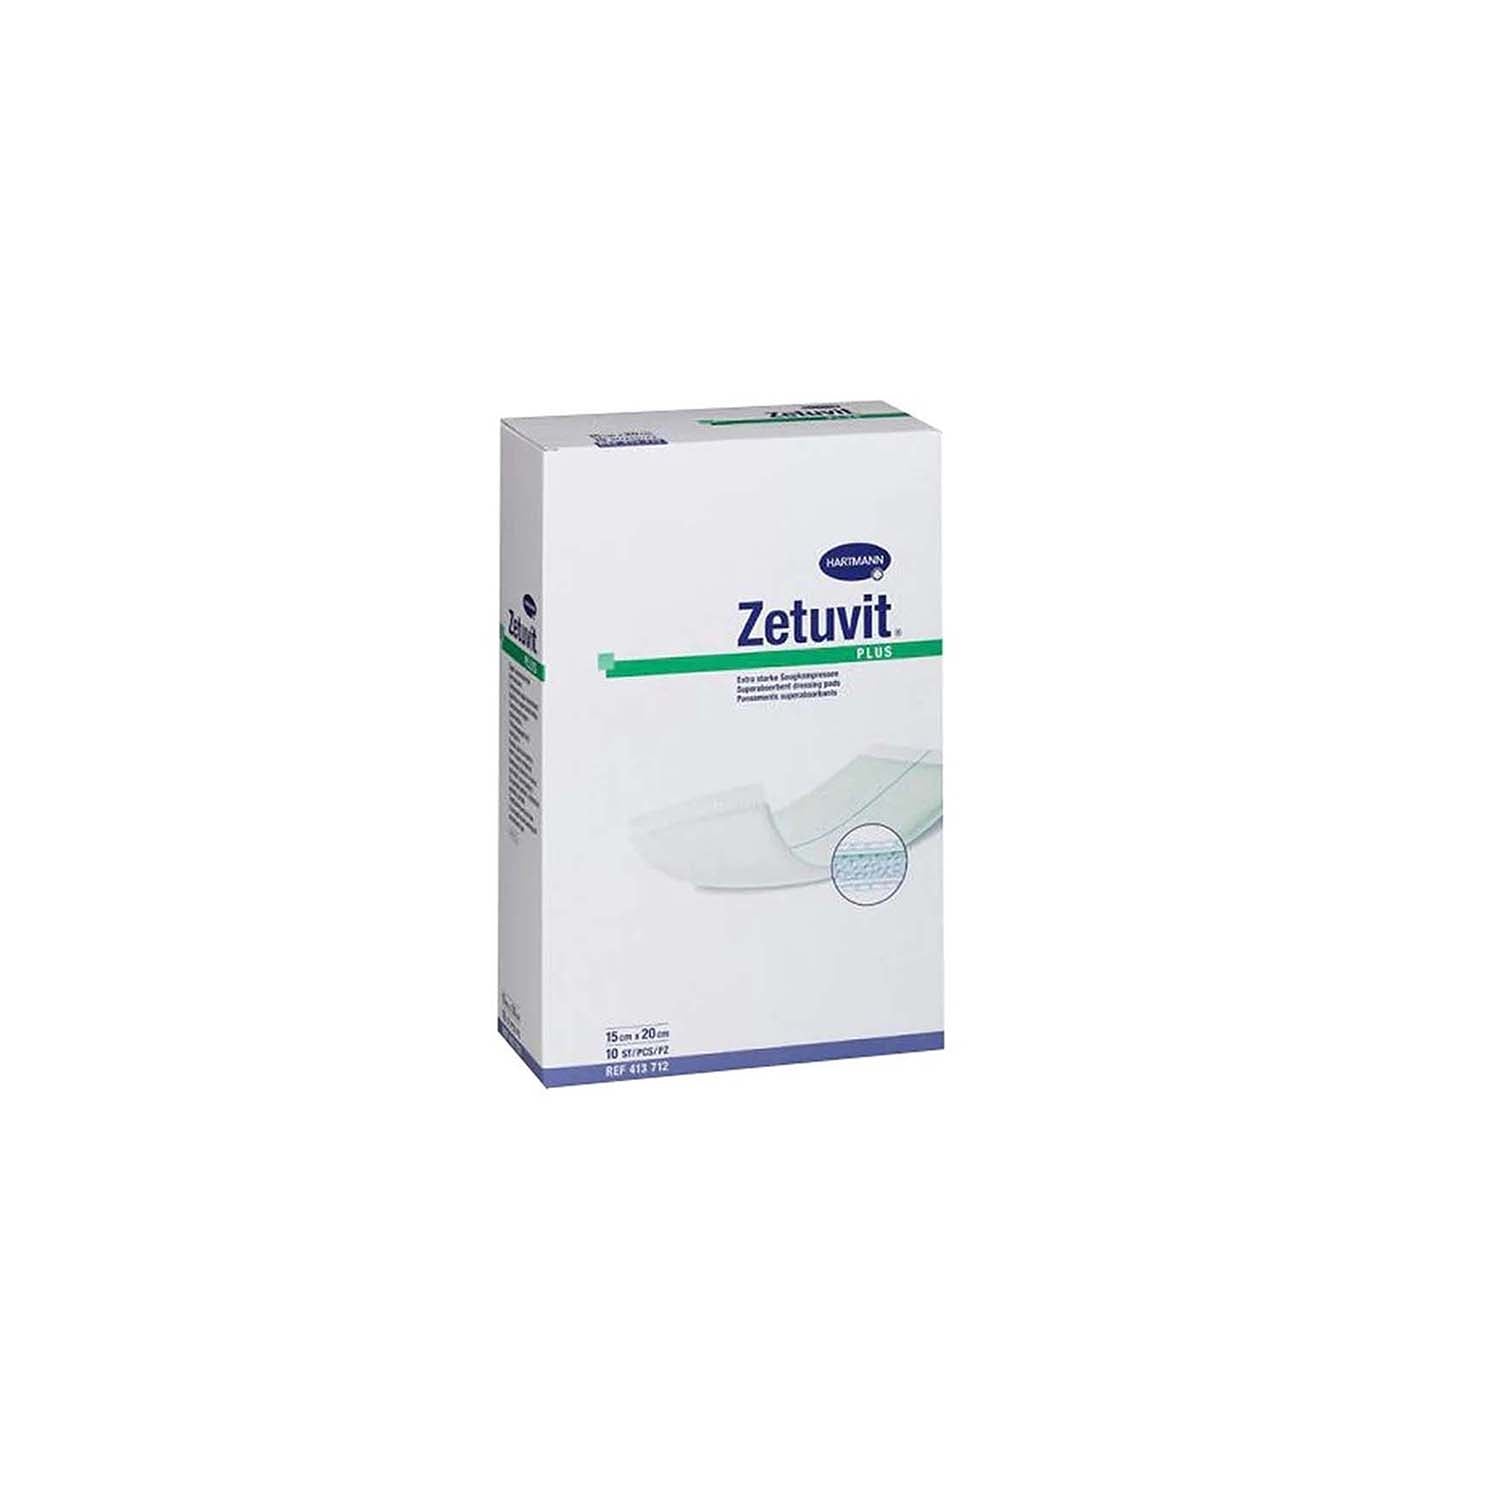 Zetuvit Plus Non-Adhesive Super Absorbent Dressing | Sterile | 15 x 20cm | Pack of 10 | Short Expiry Date